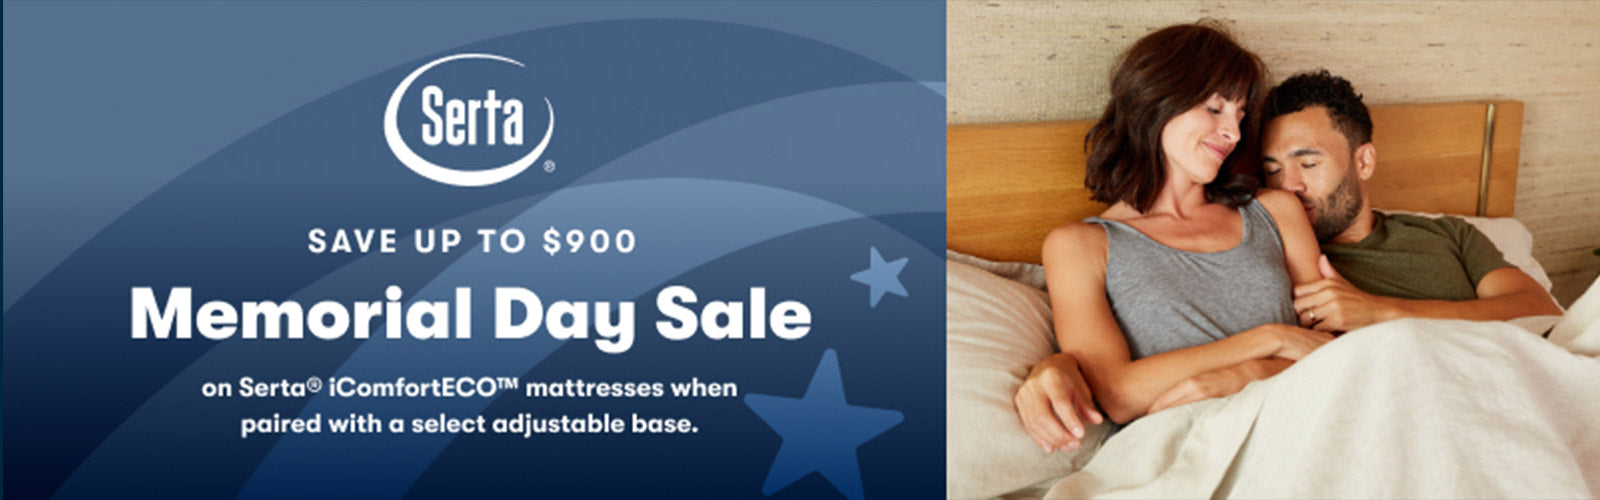 Serta Memorial Day Sale Save up to $900 on select adjustable mattress sets